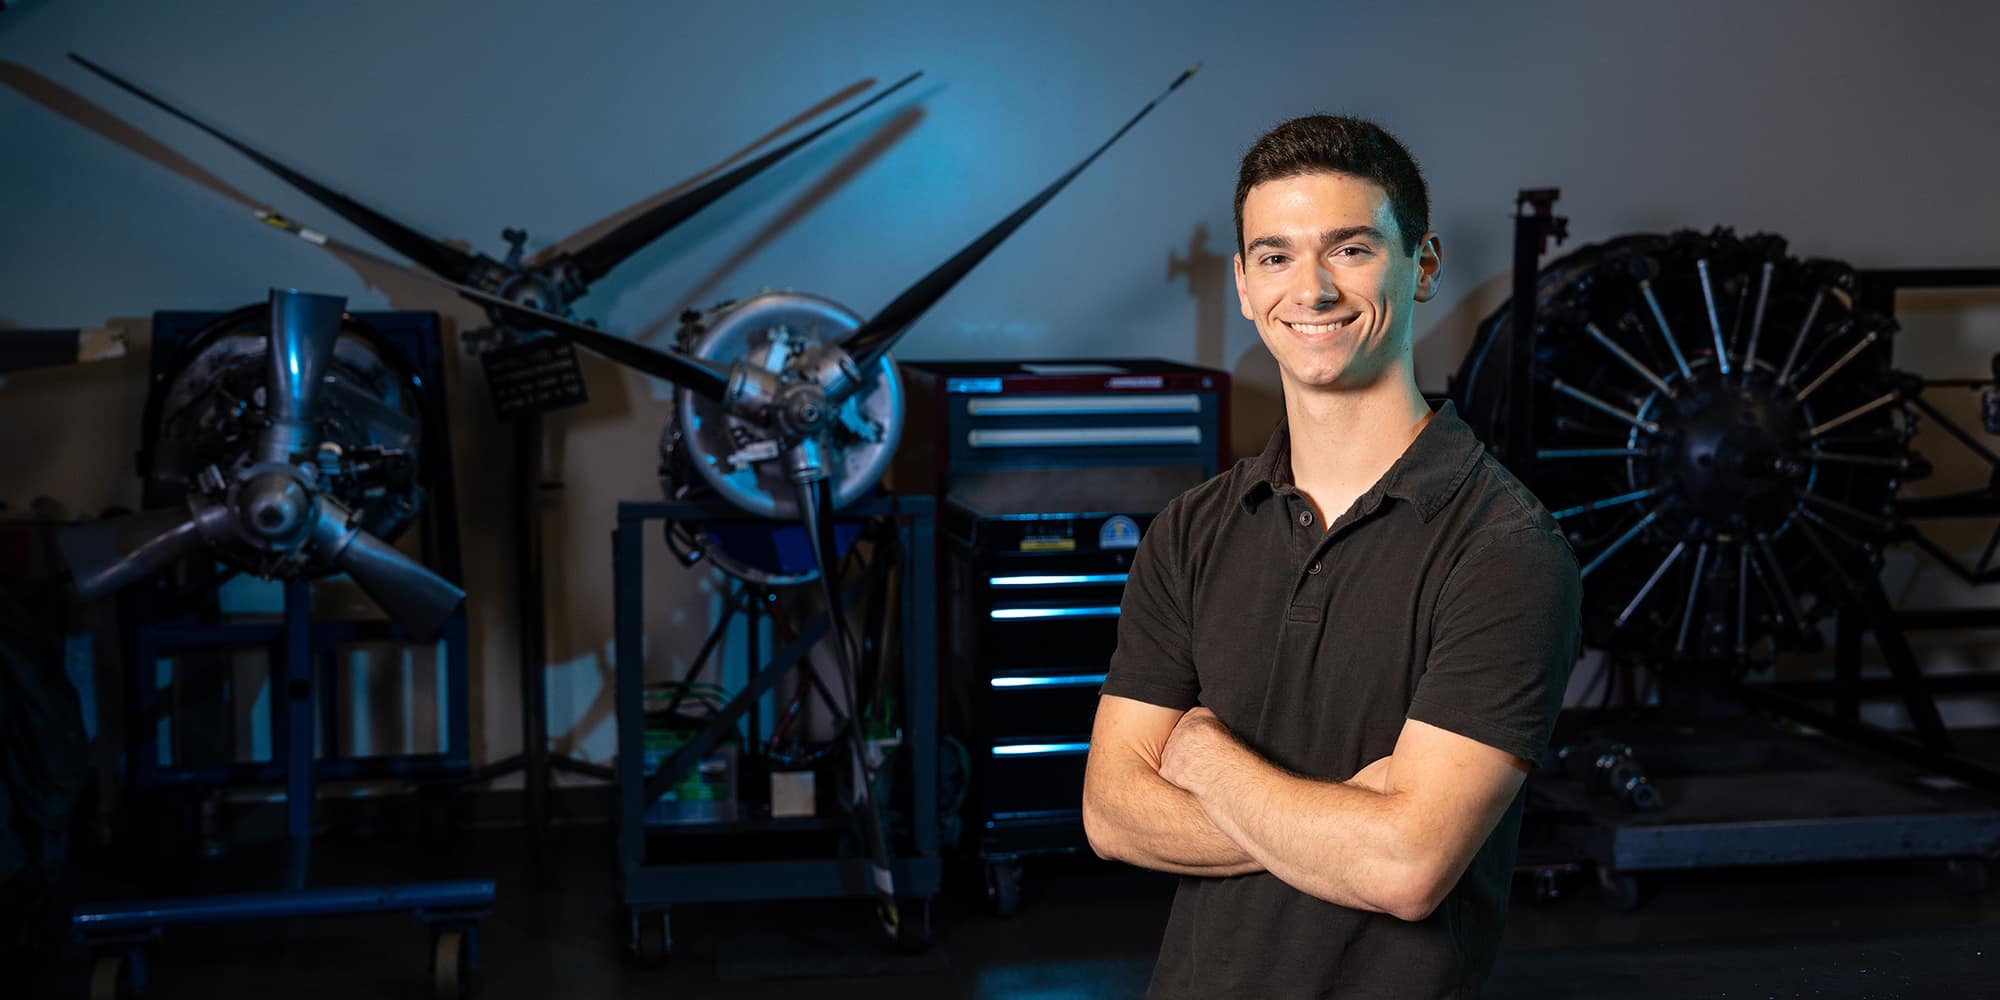 Nicolas Napoleoni, shown here in one of Embry-Riddle’s leading-edge maintenance hangars, is exploring every avenue of aviation. (Photo: Embry-Riddle / Bill Fredette-Huffman)